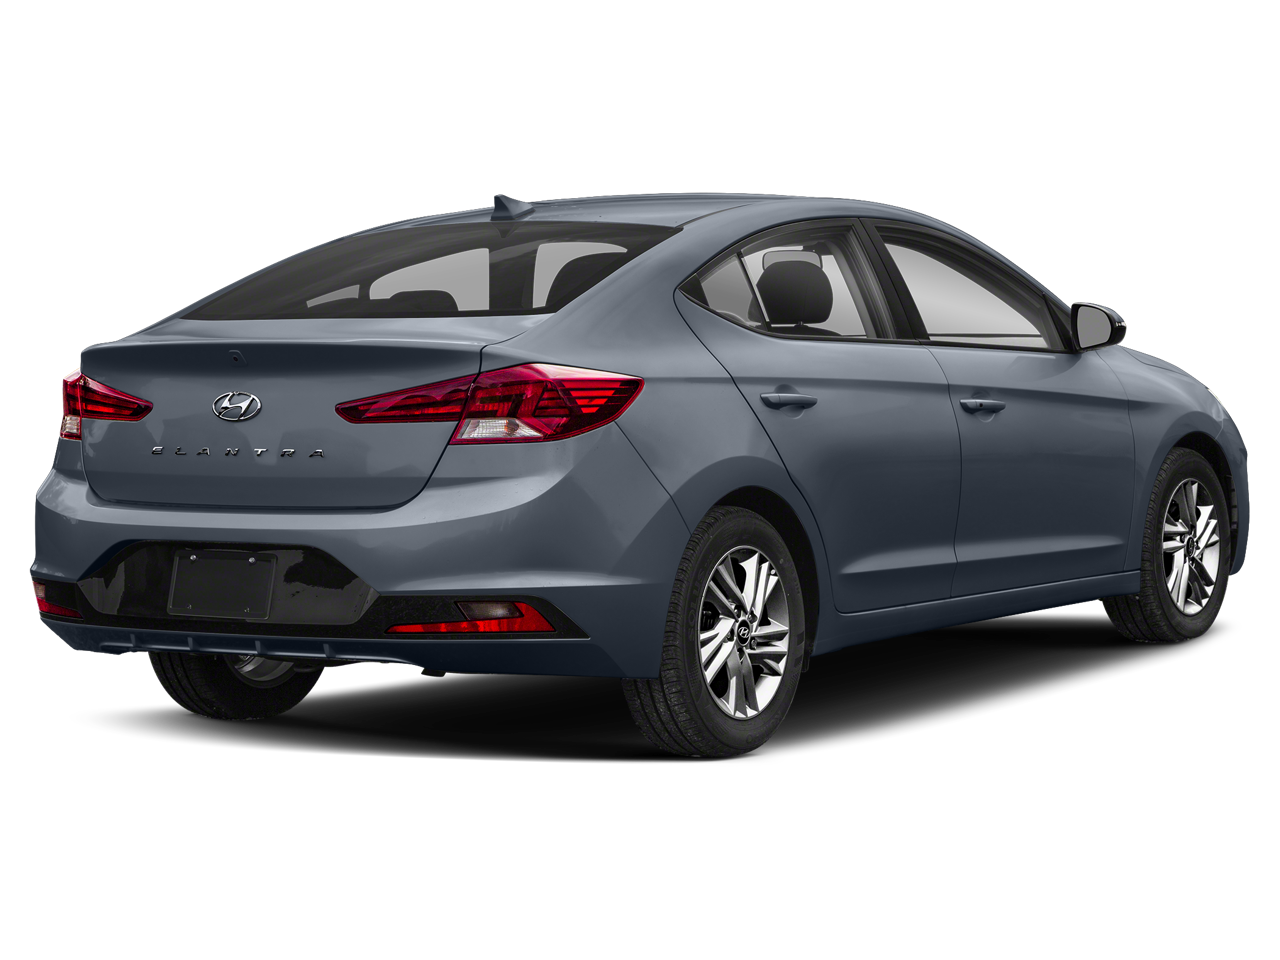 Used 2020 Hyundai Elantra Value Edition with VIN 5NPD84LF6LH588978 for sale in National City, CA